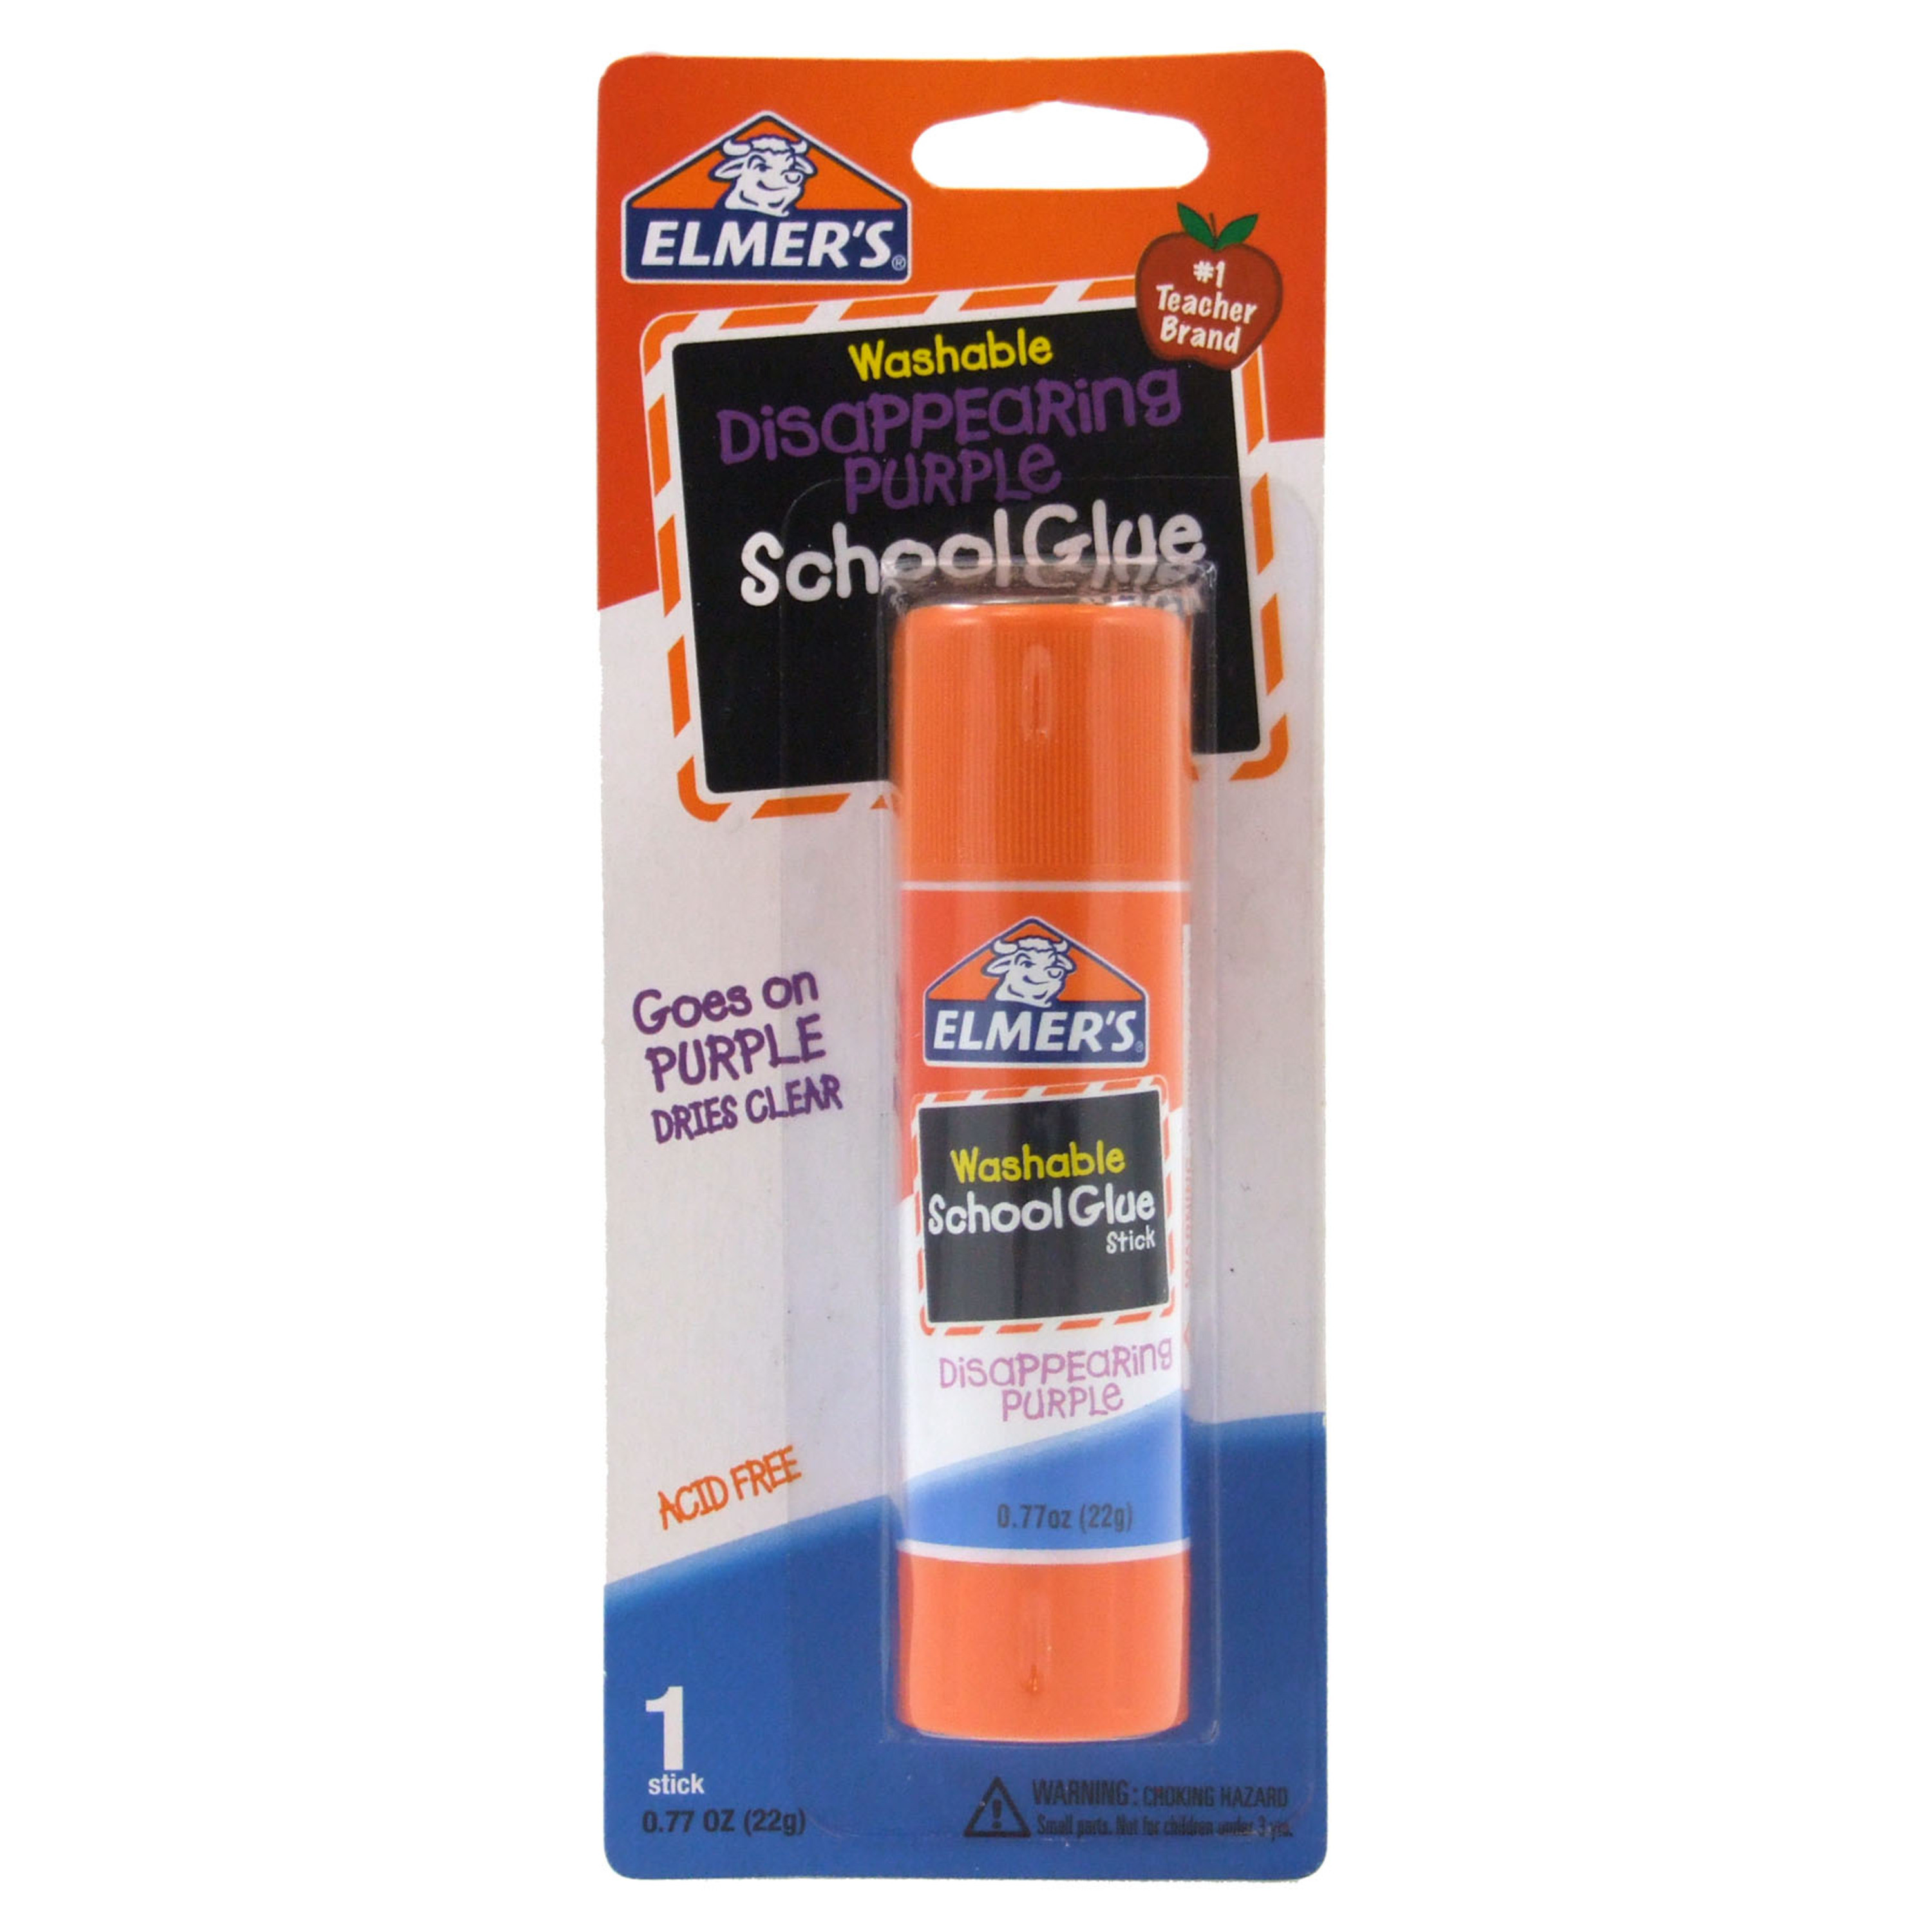 Elmer's Disappearing Purple School Glue Stick, Washable, 22 Gram, 1 Count - image 1 of 5